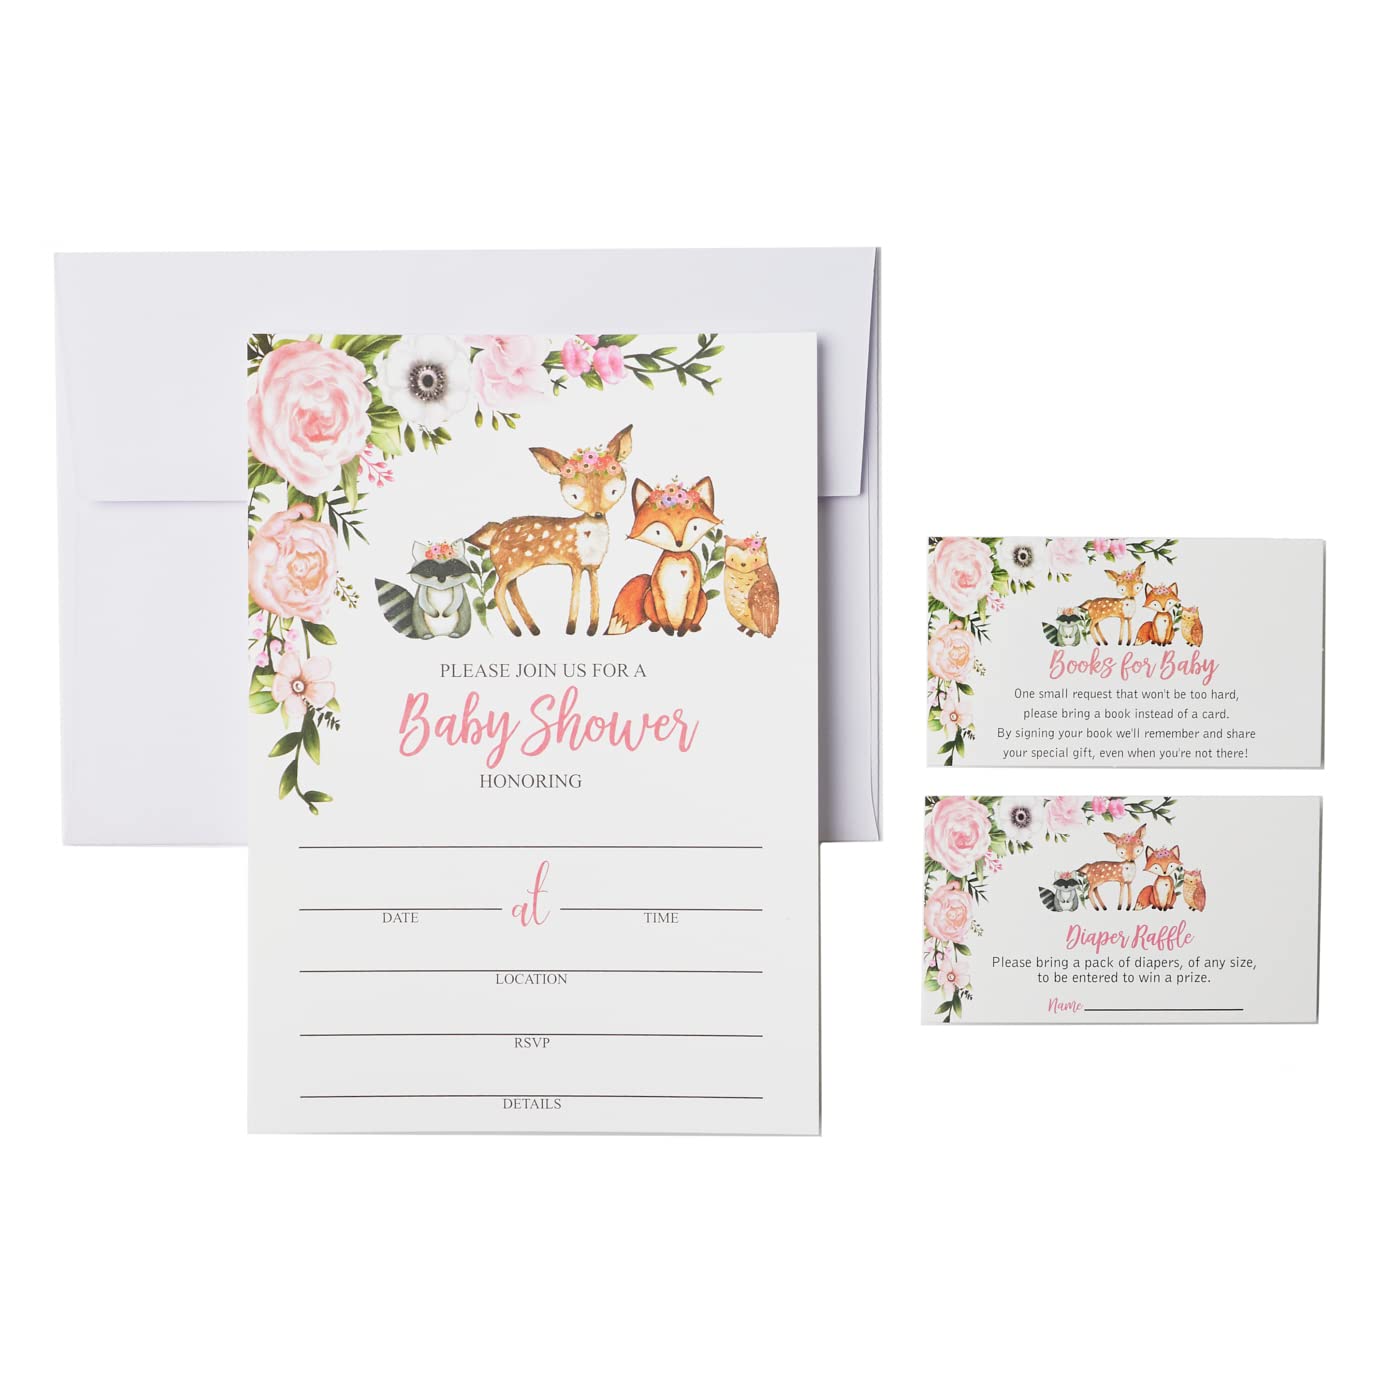 All Ewired Up 25 Girl Woodlands Baby Shower Invitations, Diaper Raffle Tickets, Book Request Cards with Envelopes, 24 Guests Dinner Plates, Dessert Plates, Cups, Gold Straws and Napkins Bundle